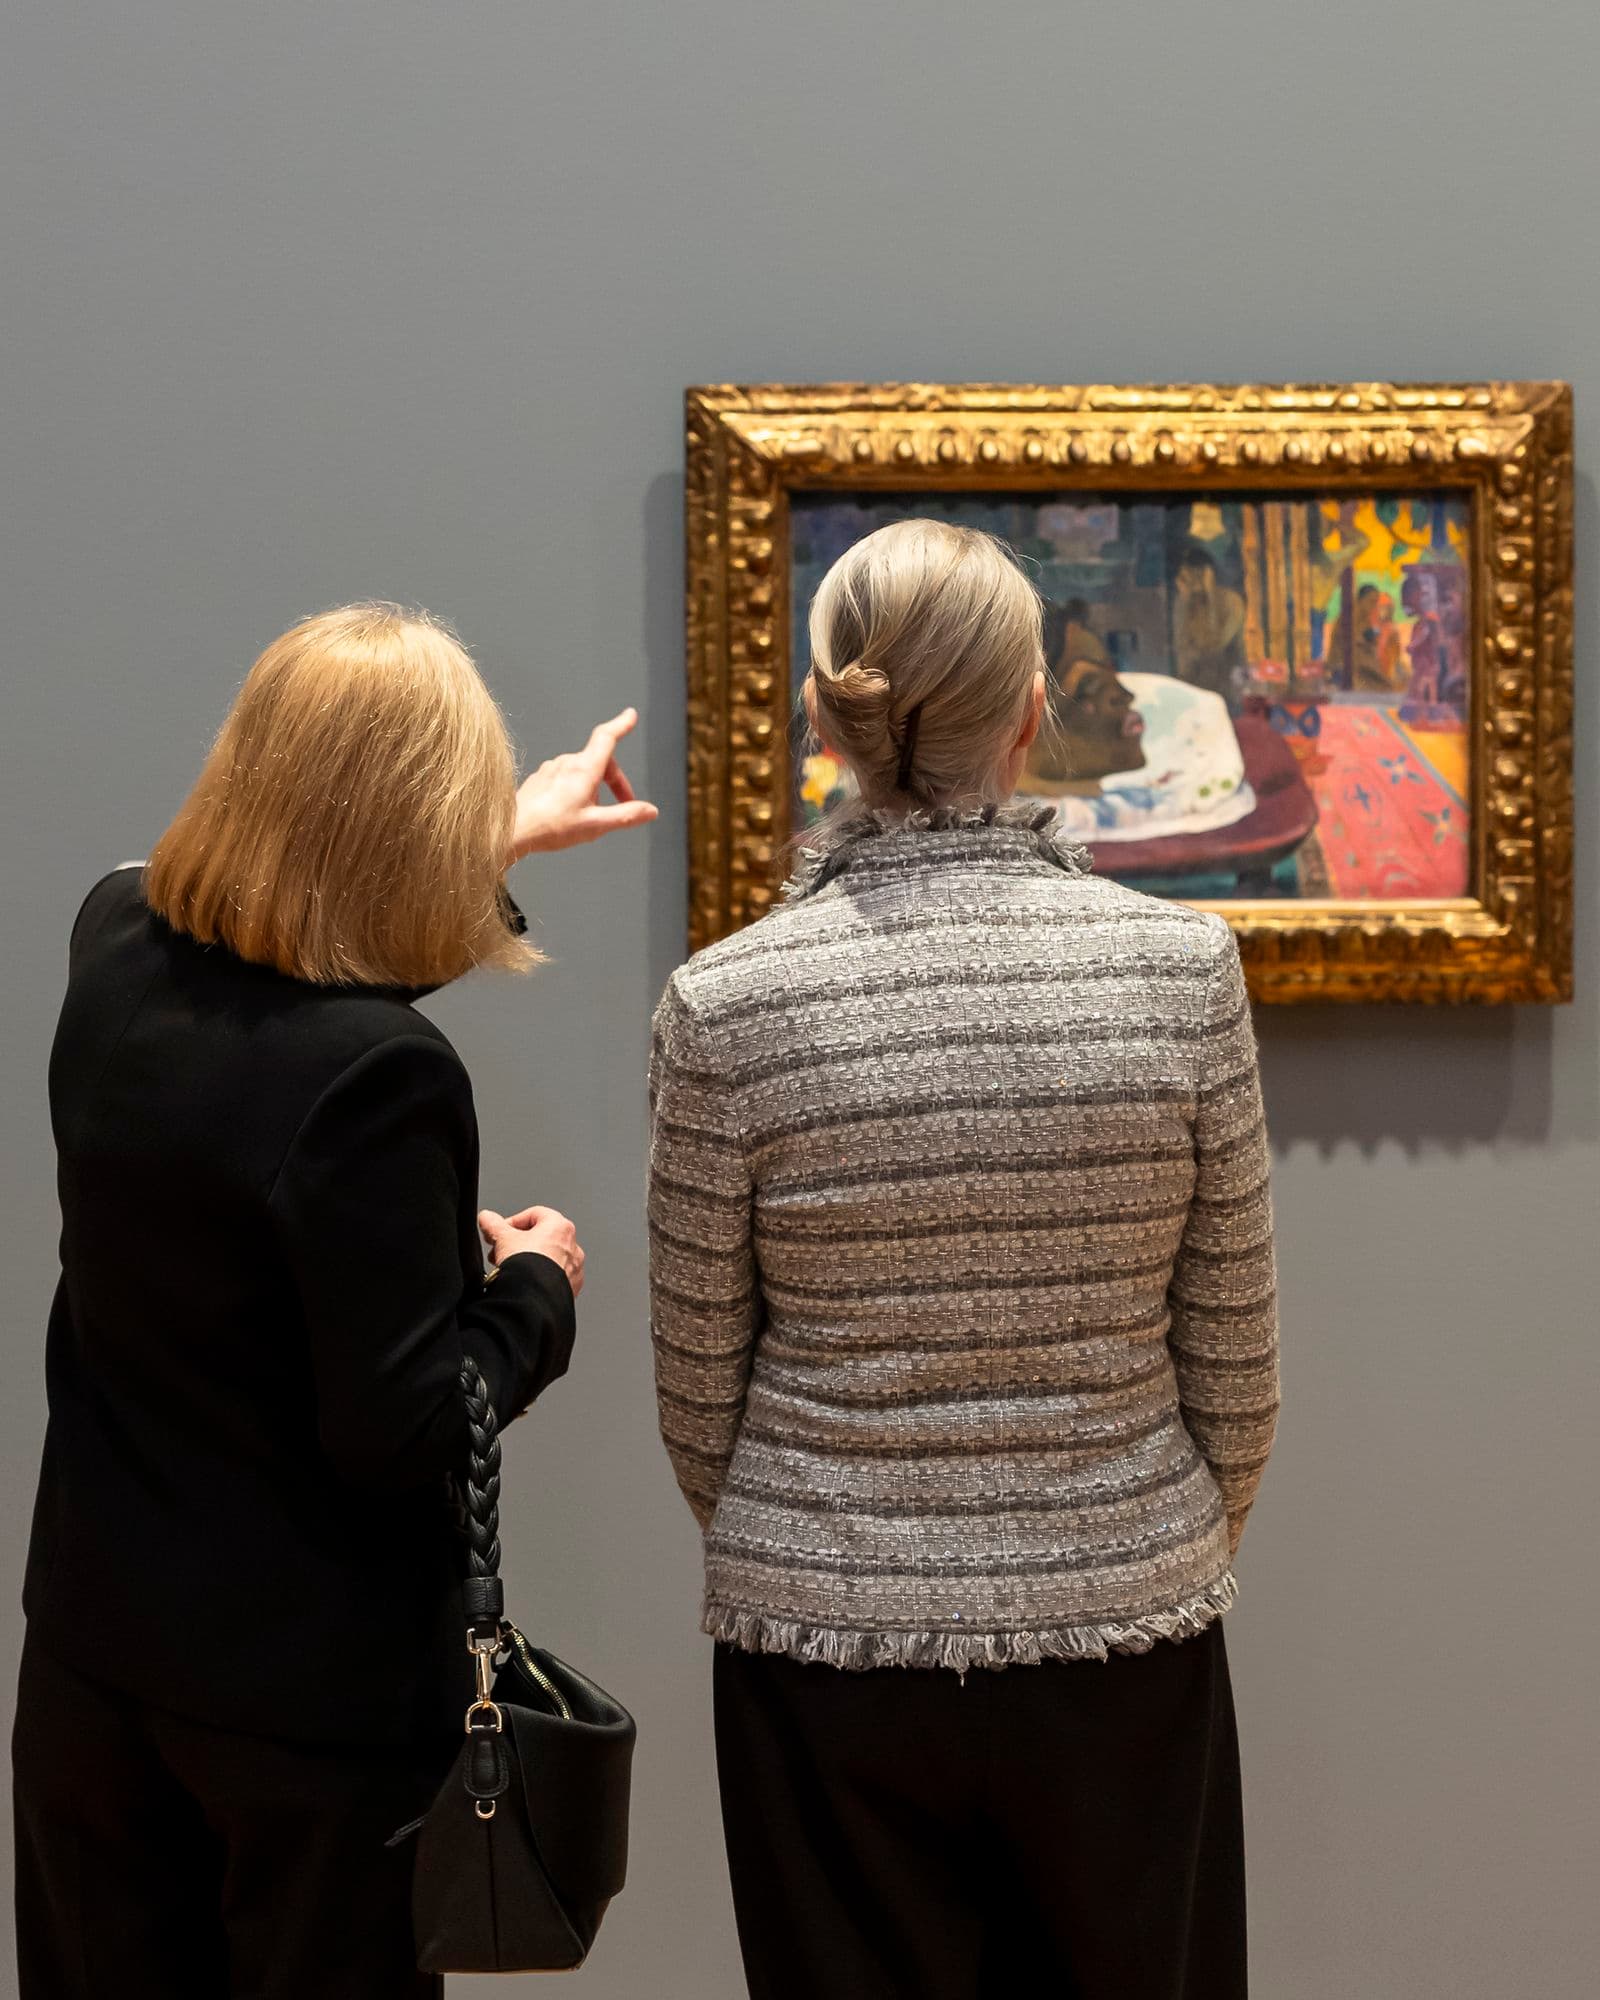 People looking at Gauguin's painting at the National Gallery of Australia.